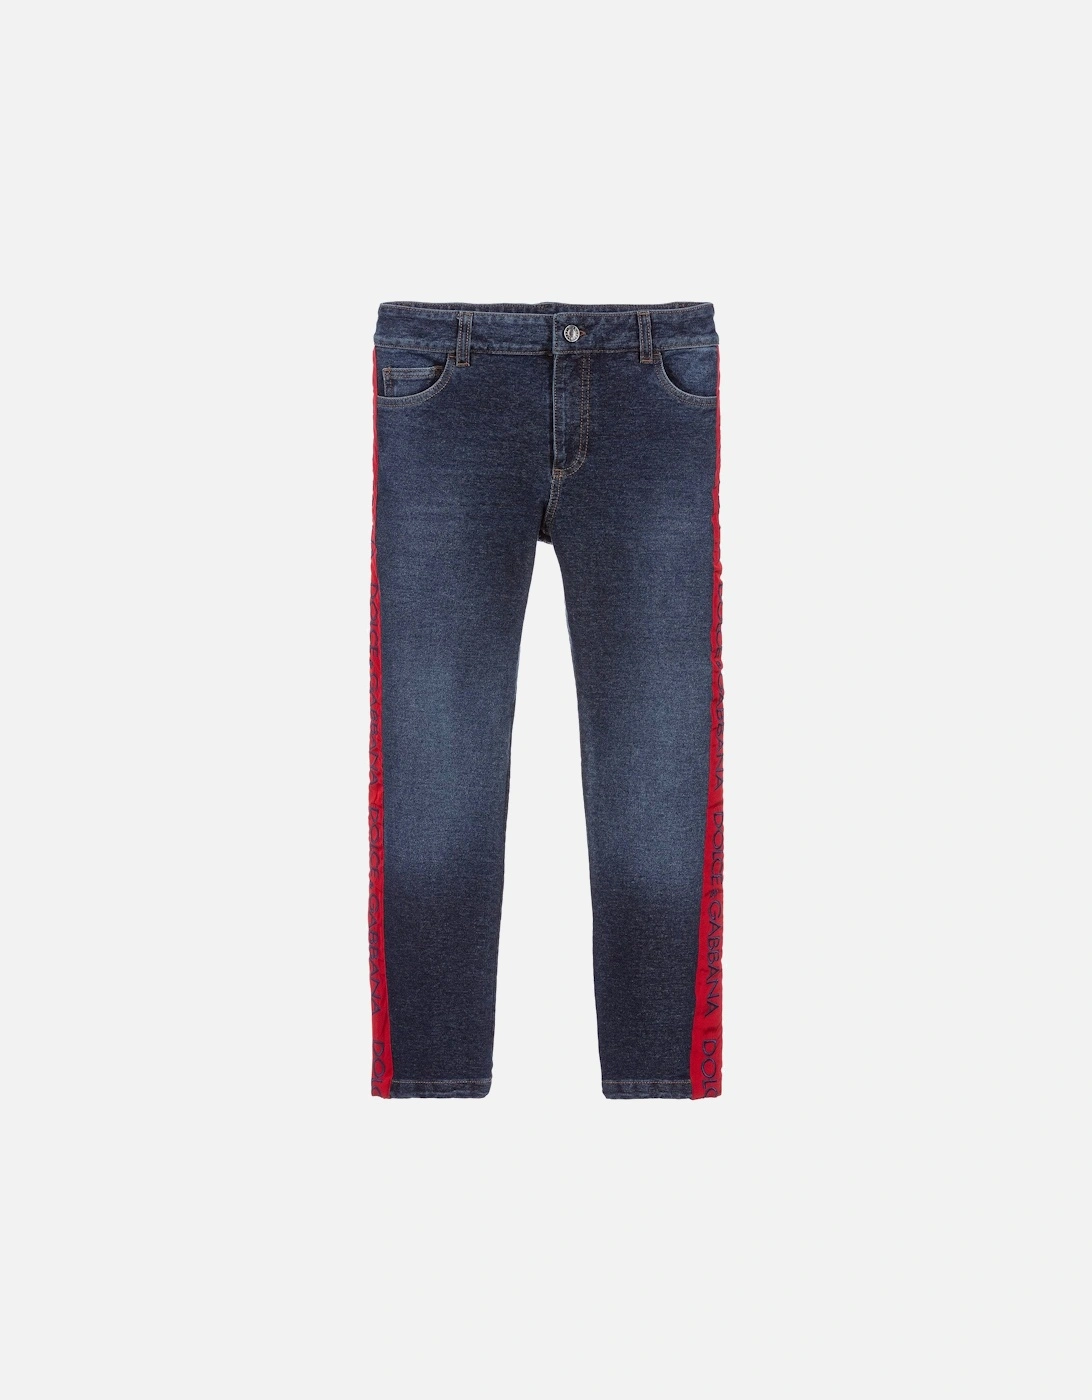 Boys Panel Jeans Blue & Red, 3 of 2